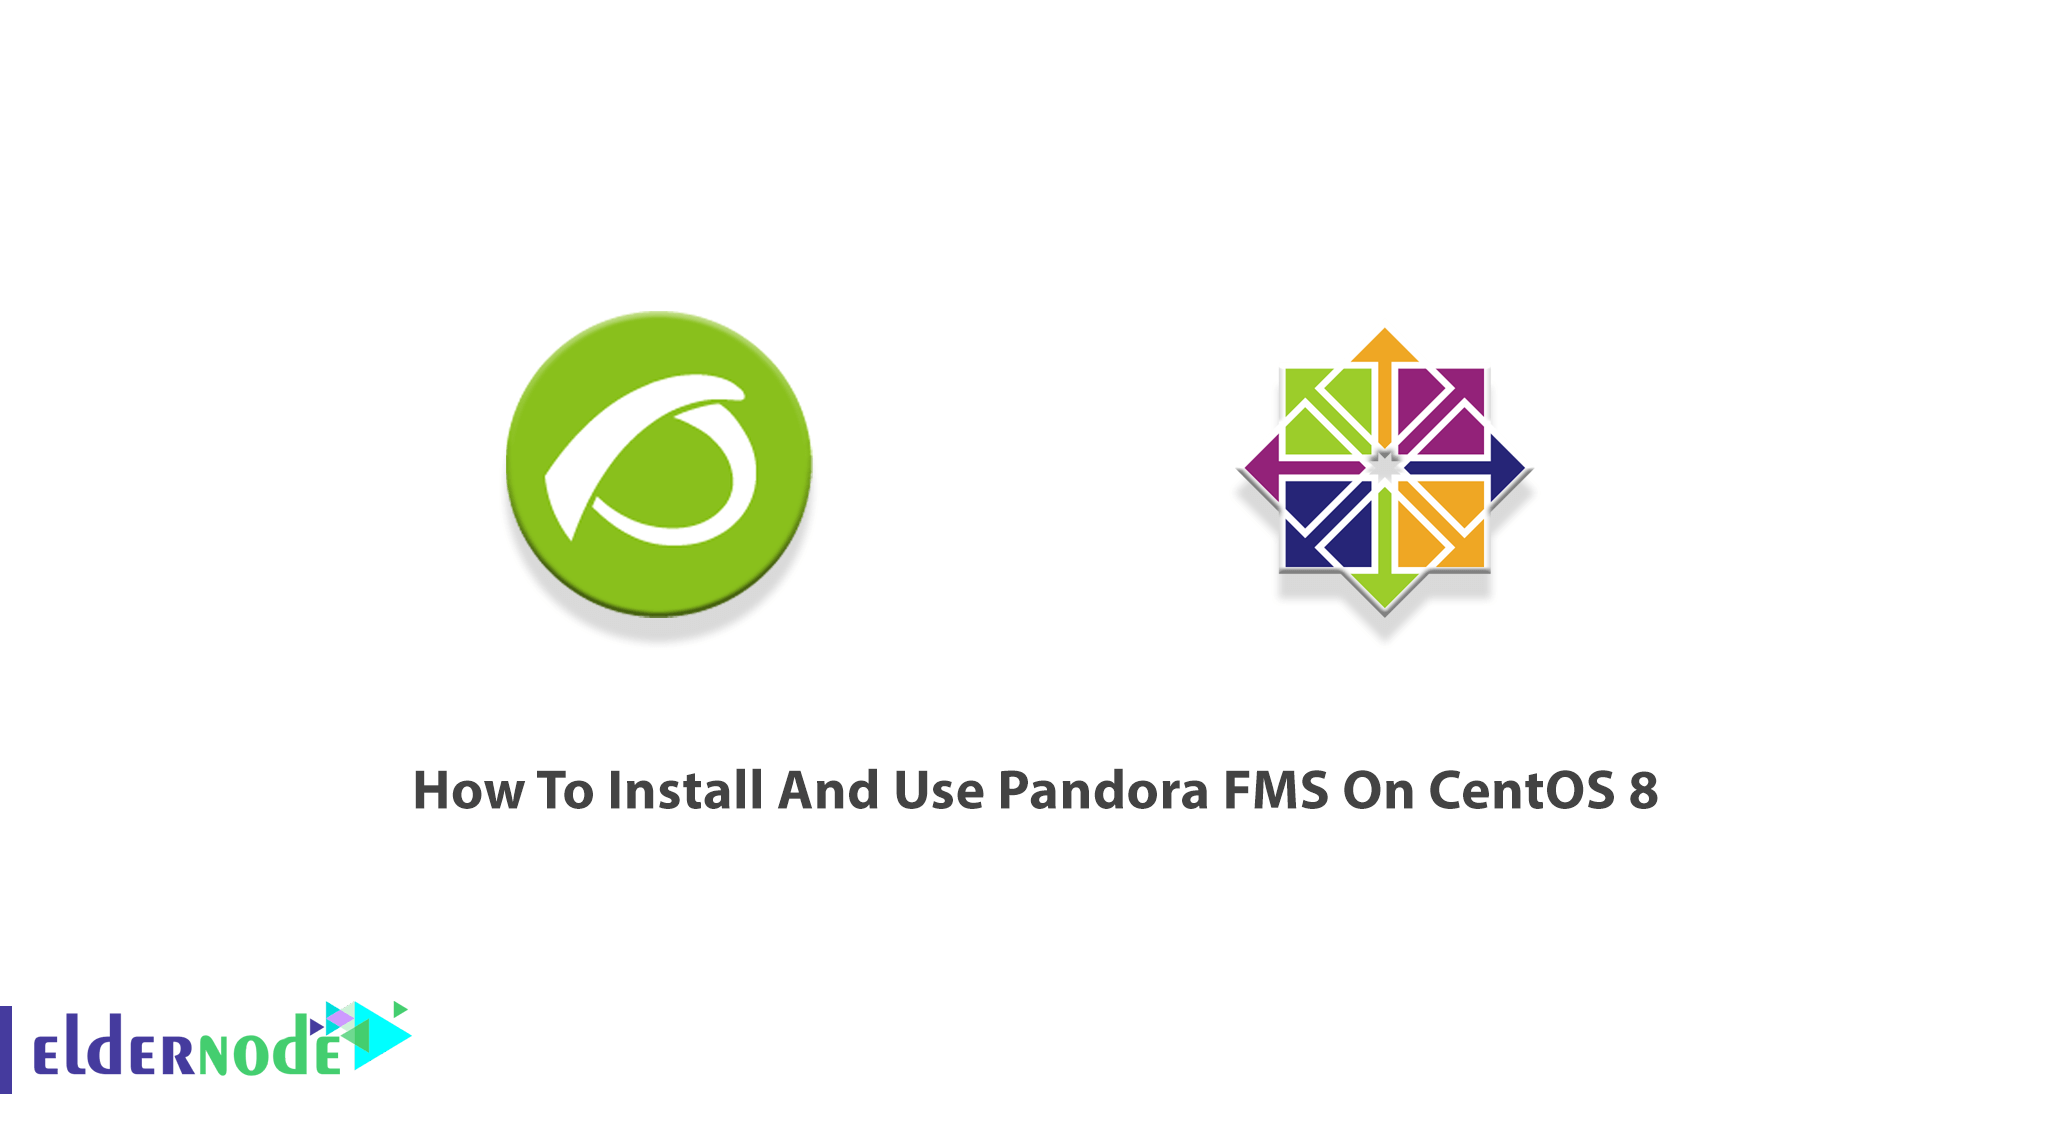 How To Install And Use Pandora FMS On Centos 8